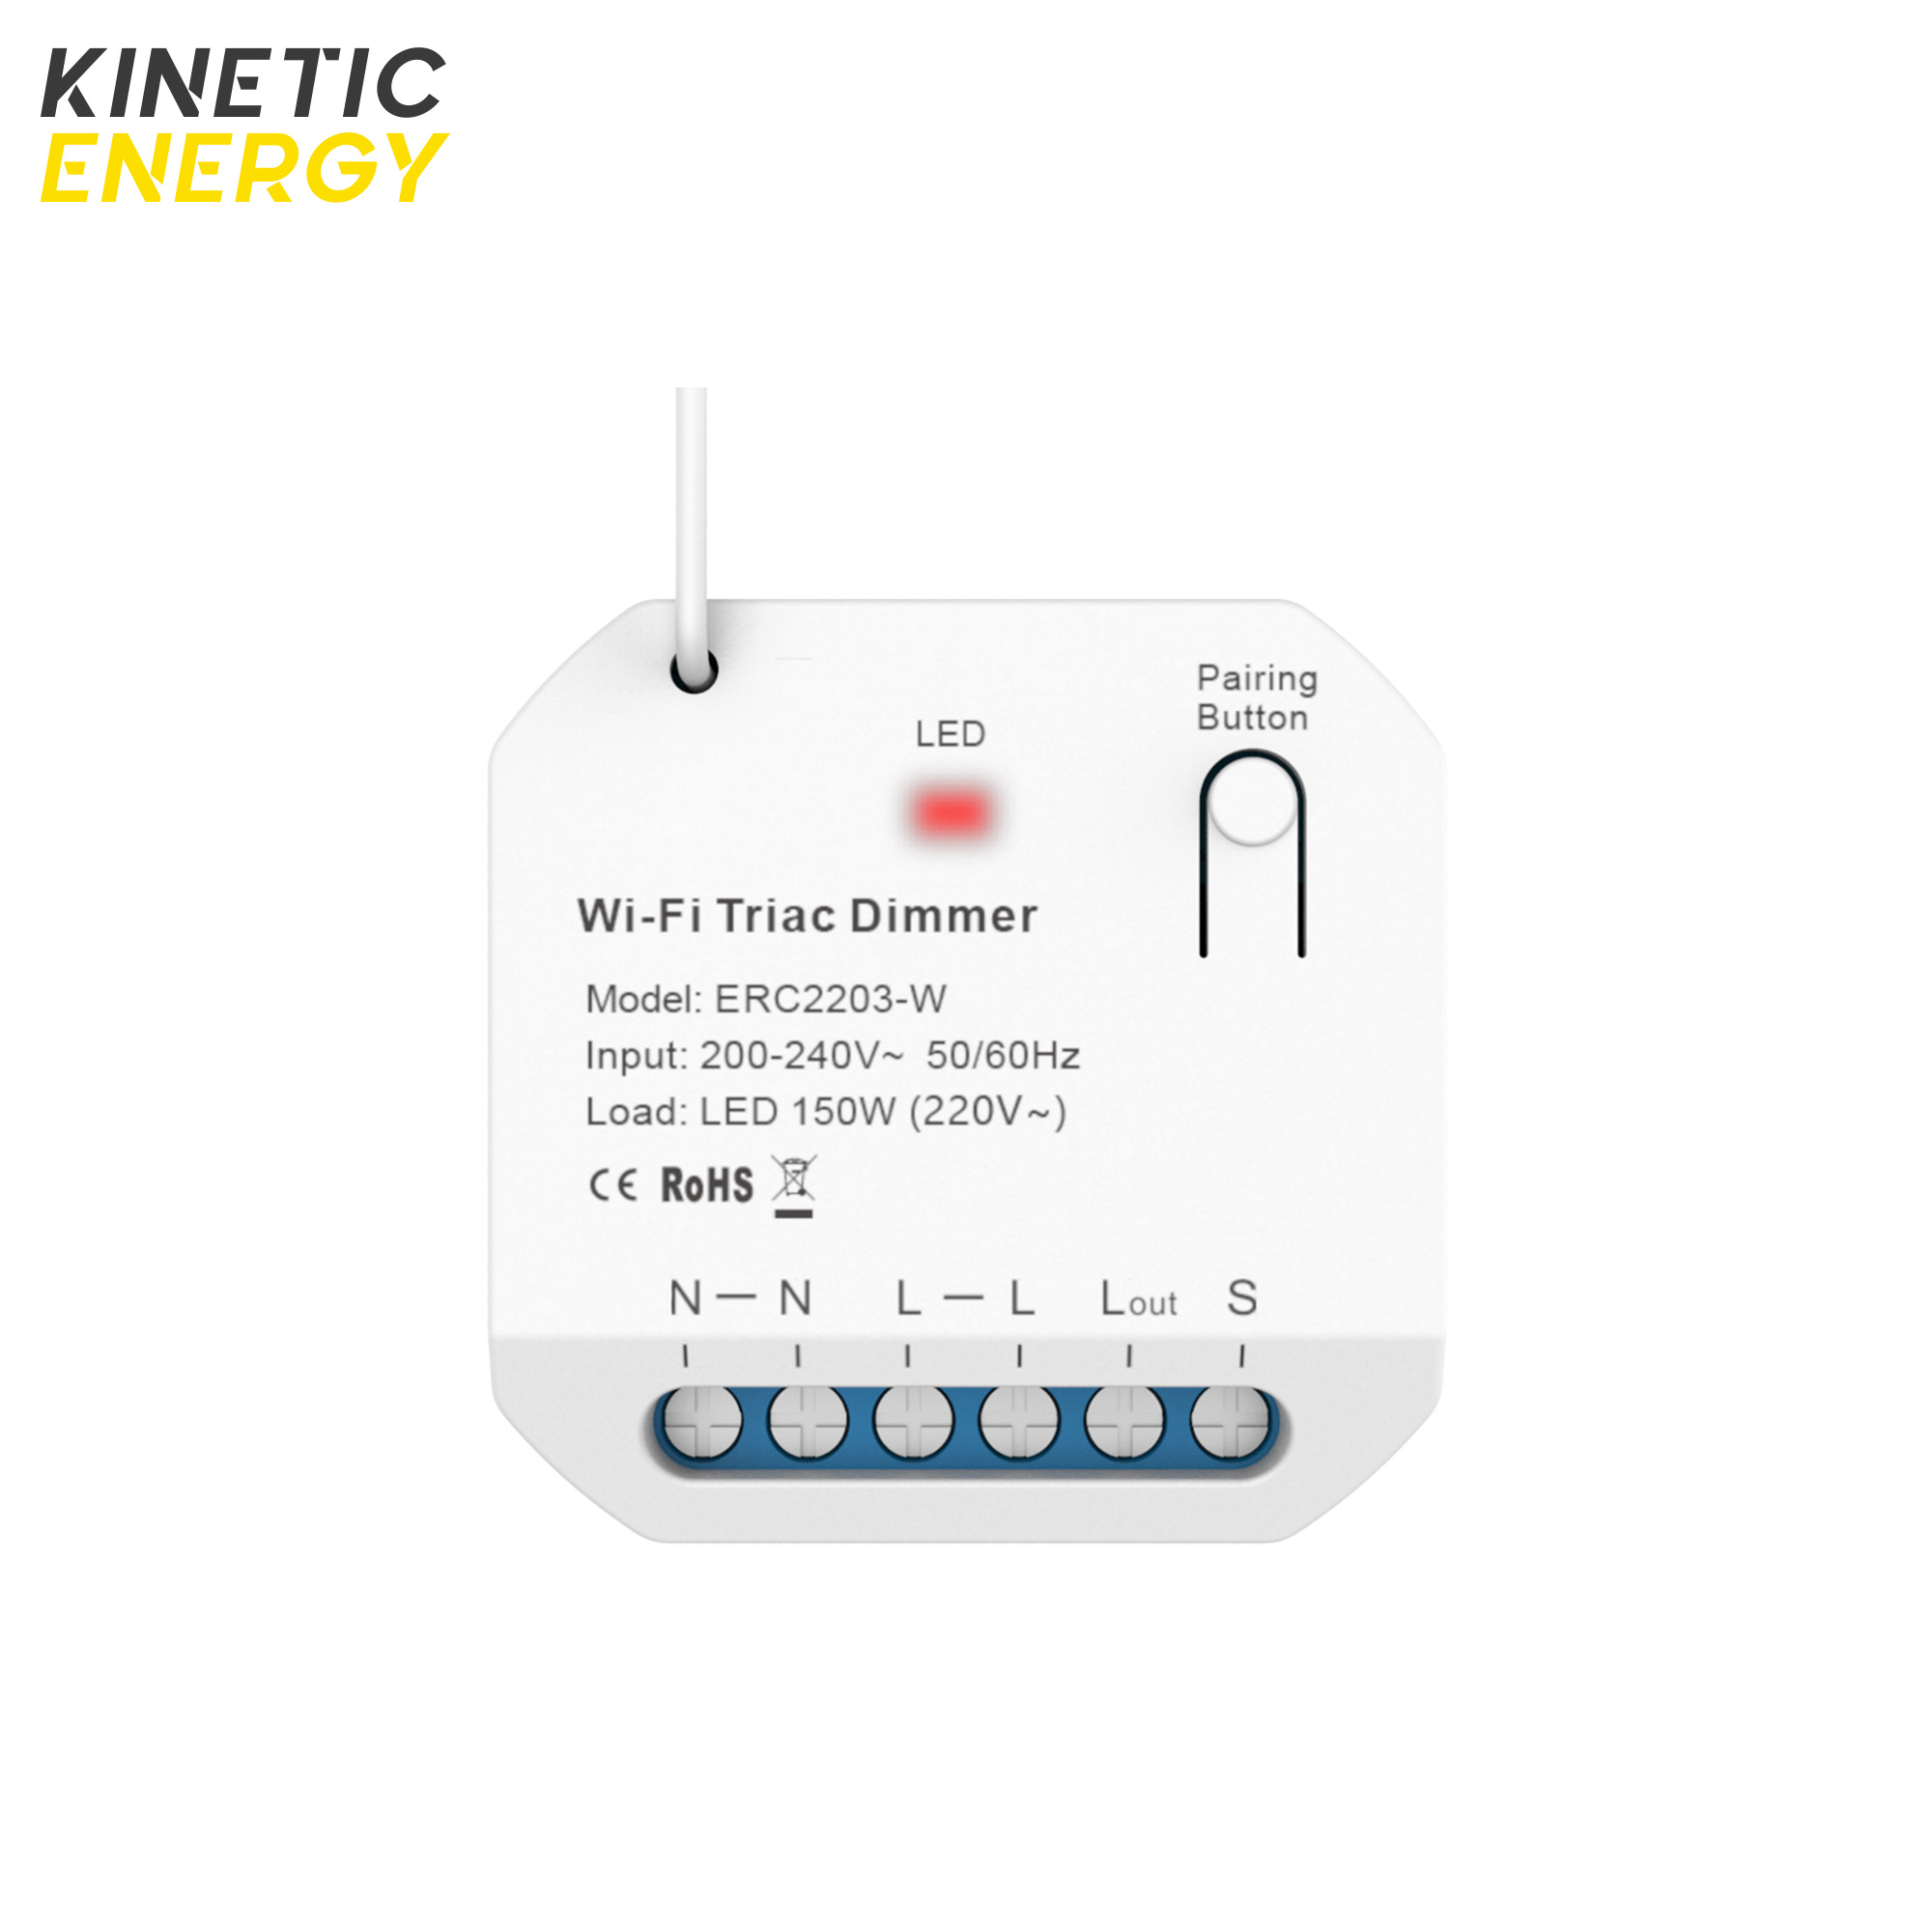 1 Channel Kinetic Energy Smart Dimming Controller WiFi+RF433 1.5A - Kinetic  Energy Europe